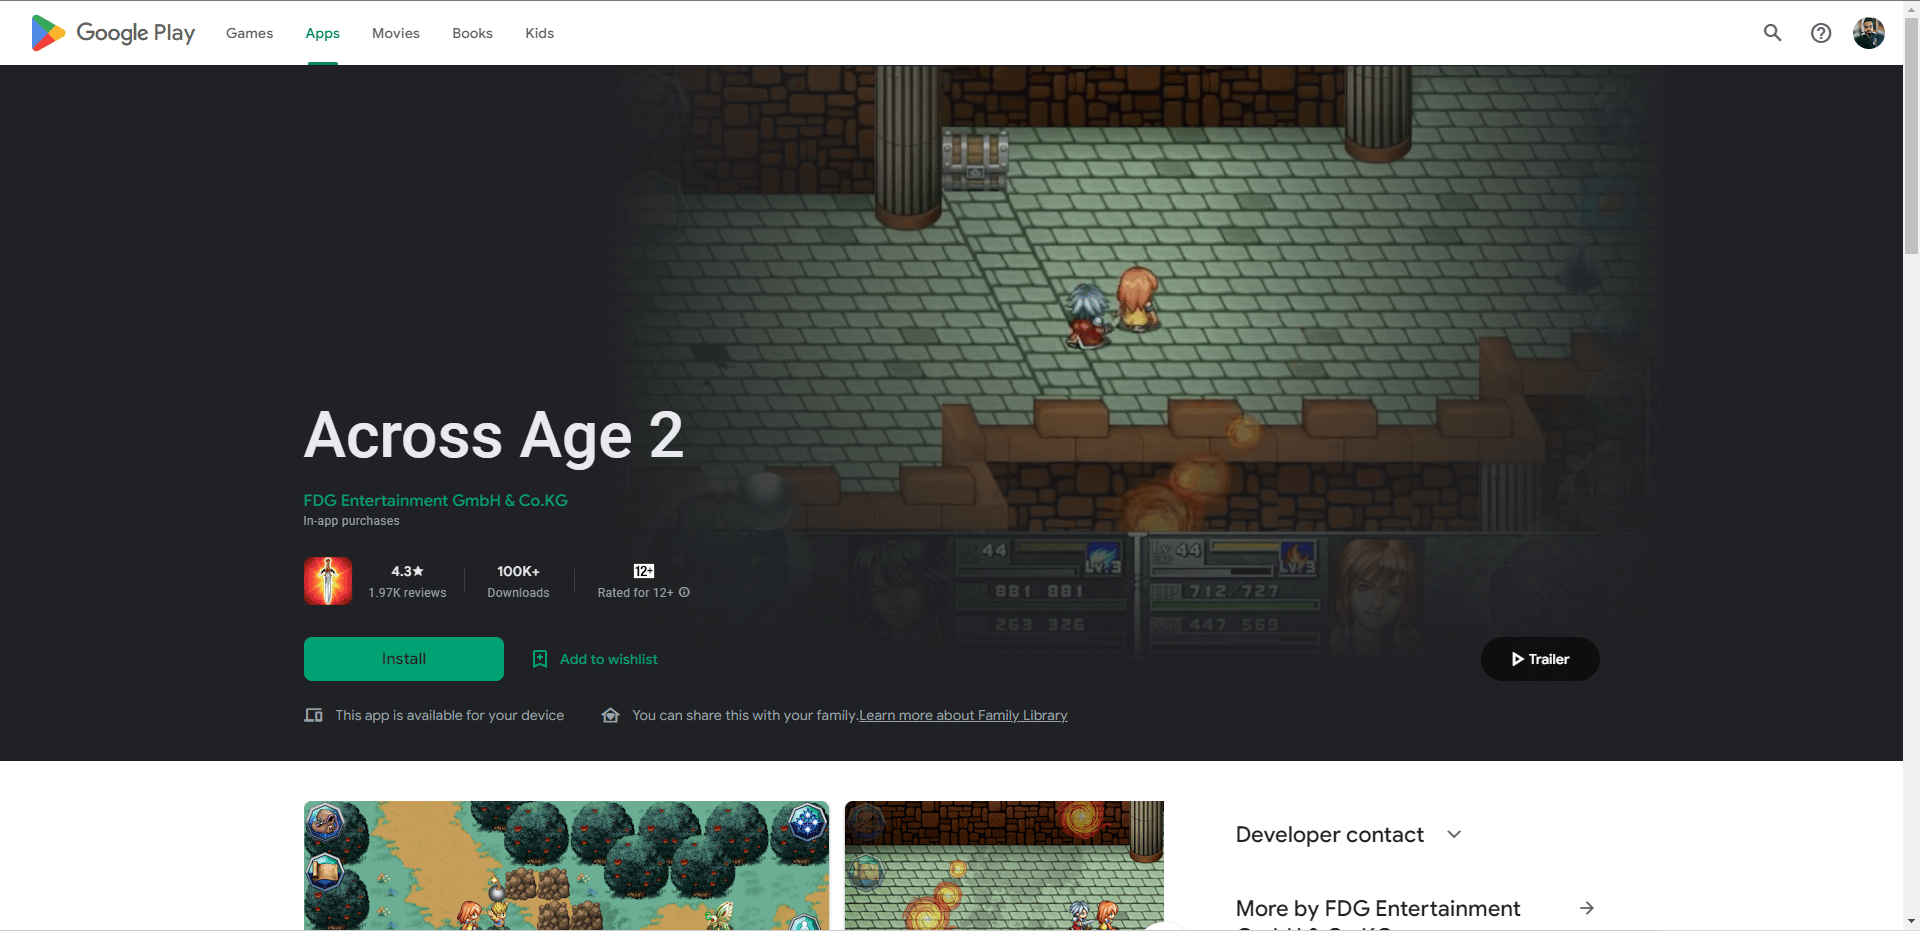 Across age play store webpage